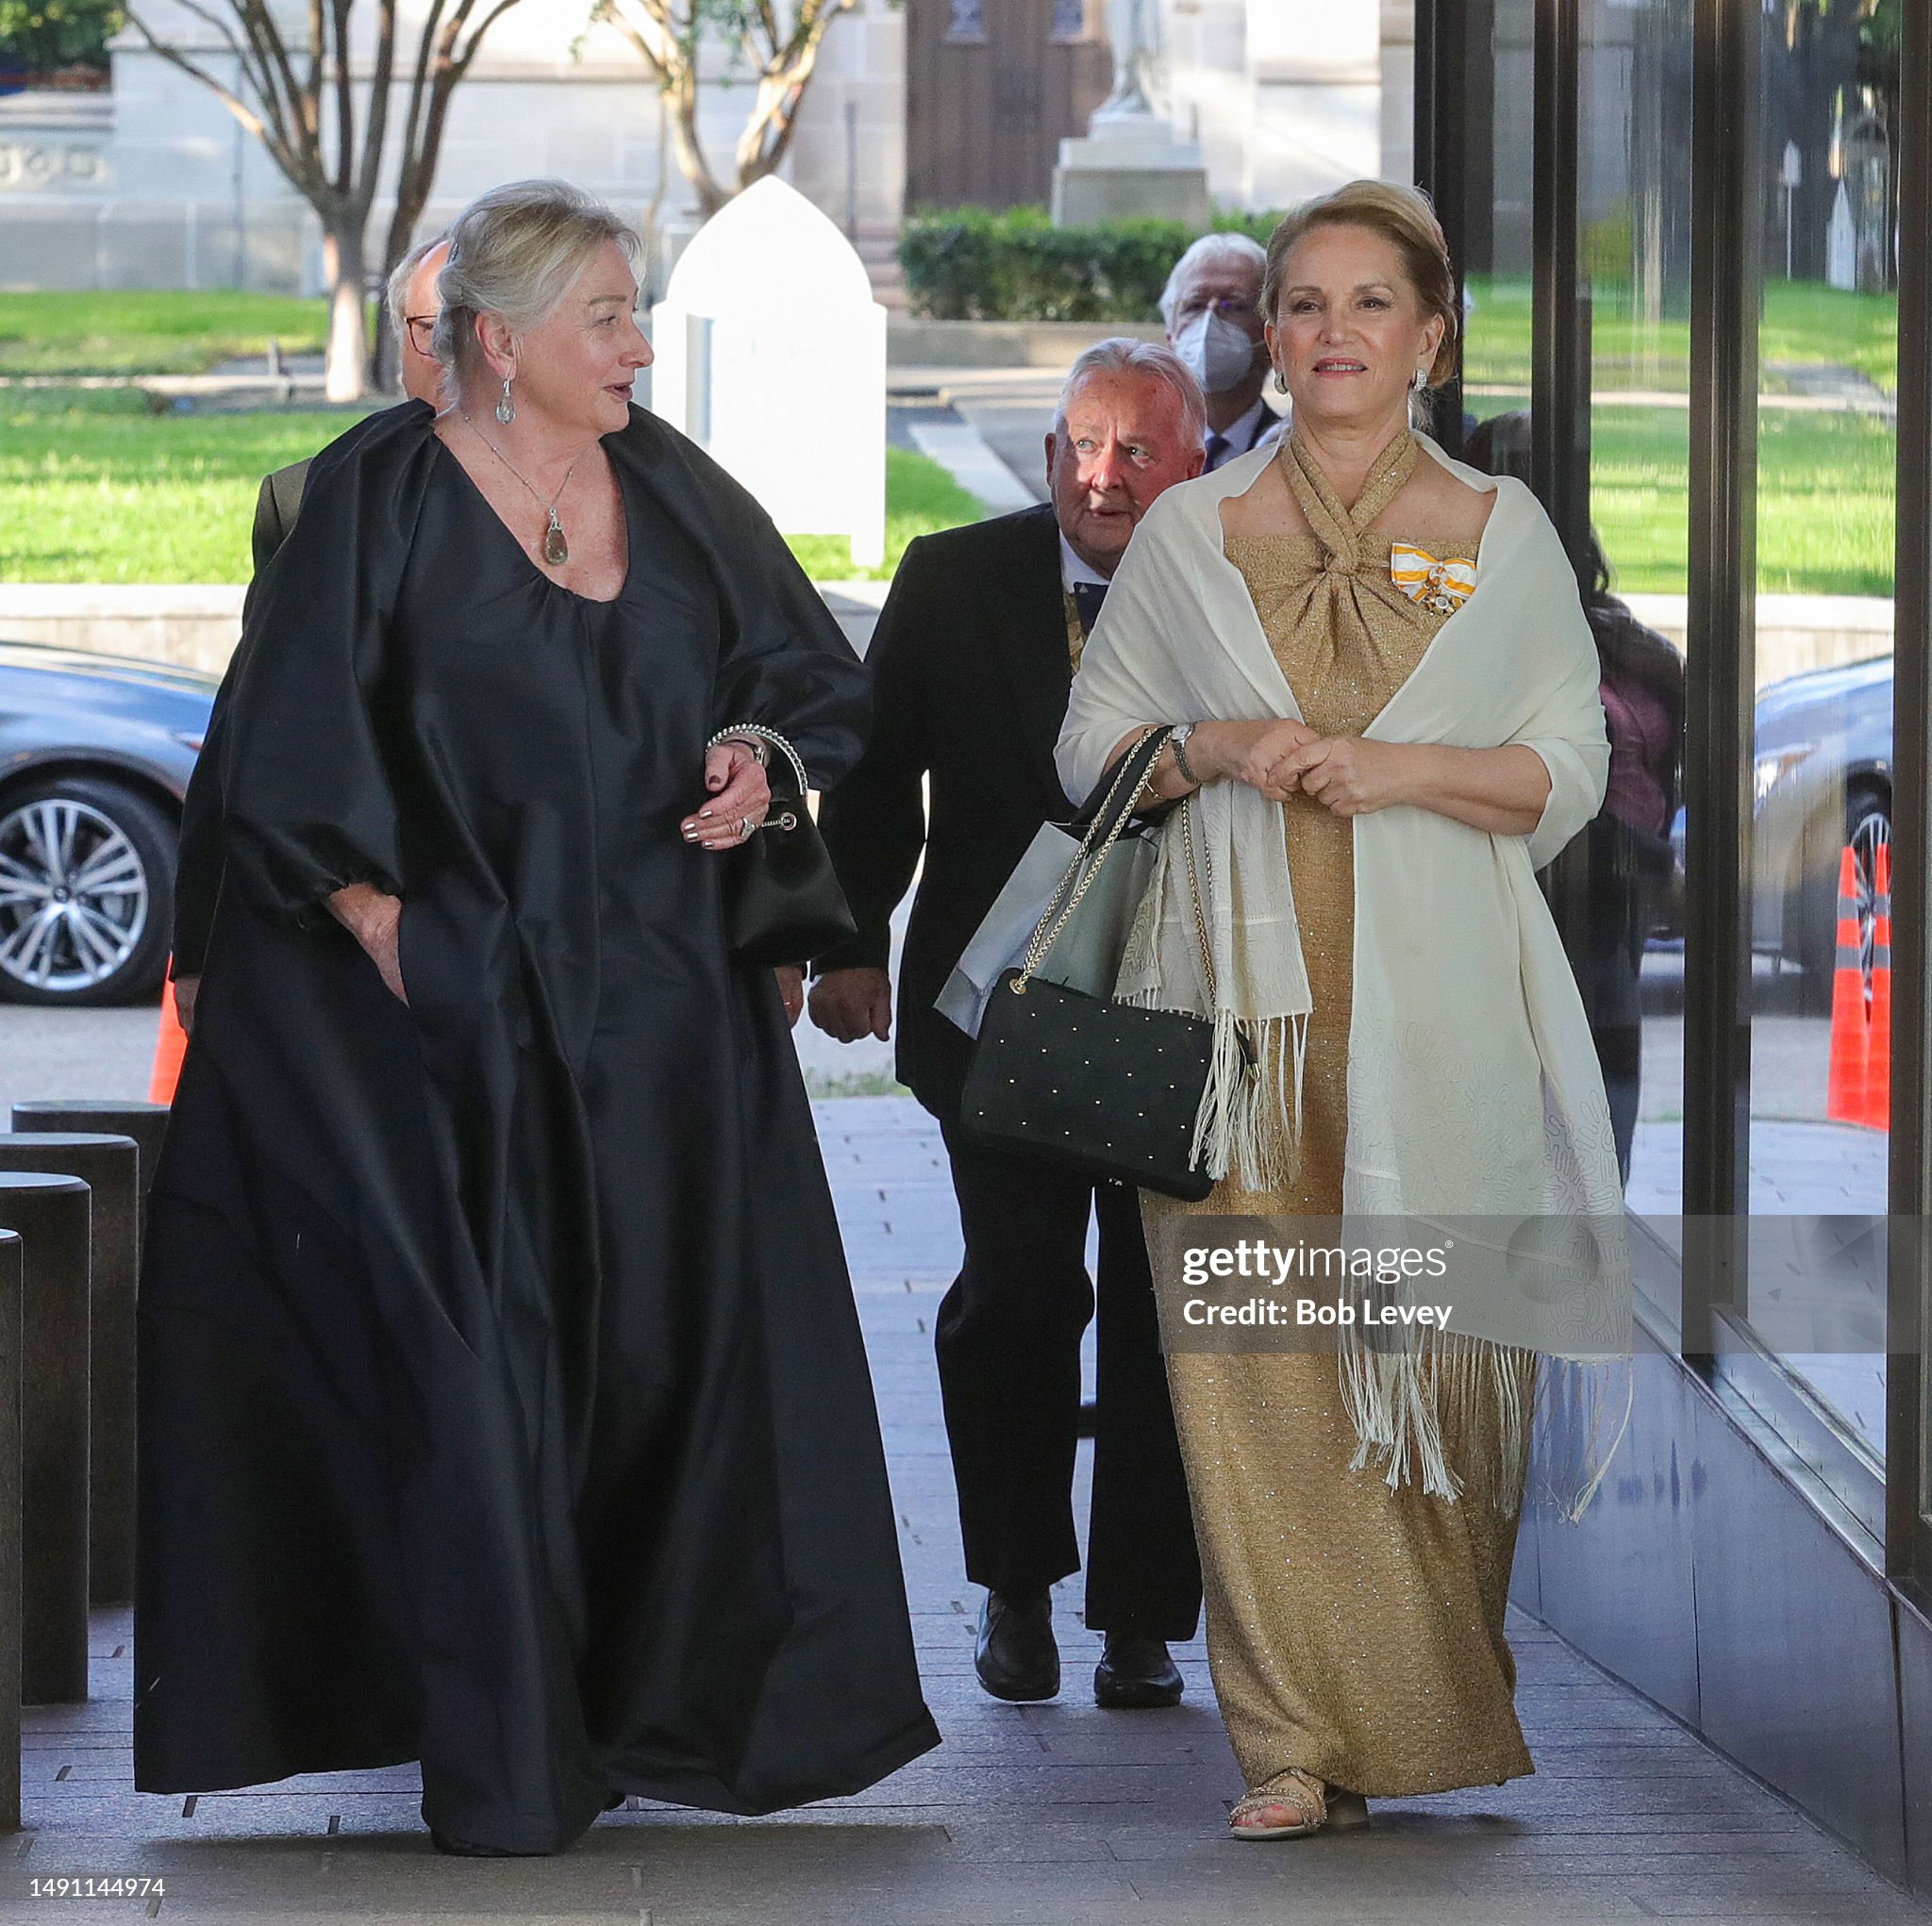 guests-arrive-at-the-sophia-awards-for-excellence-presentation-at-museum-of-fine-arts-houston.jpg